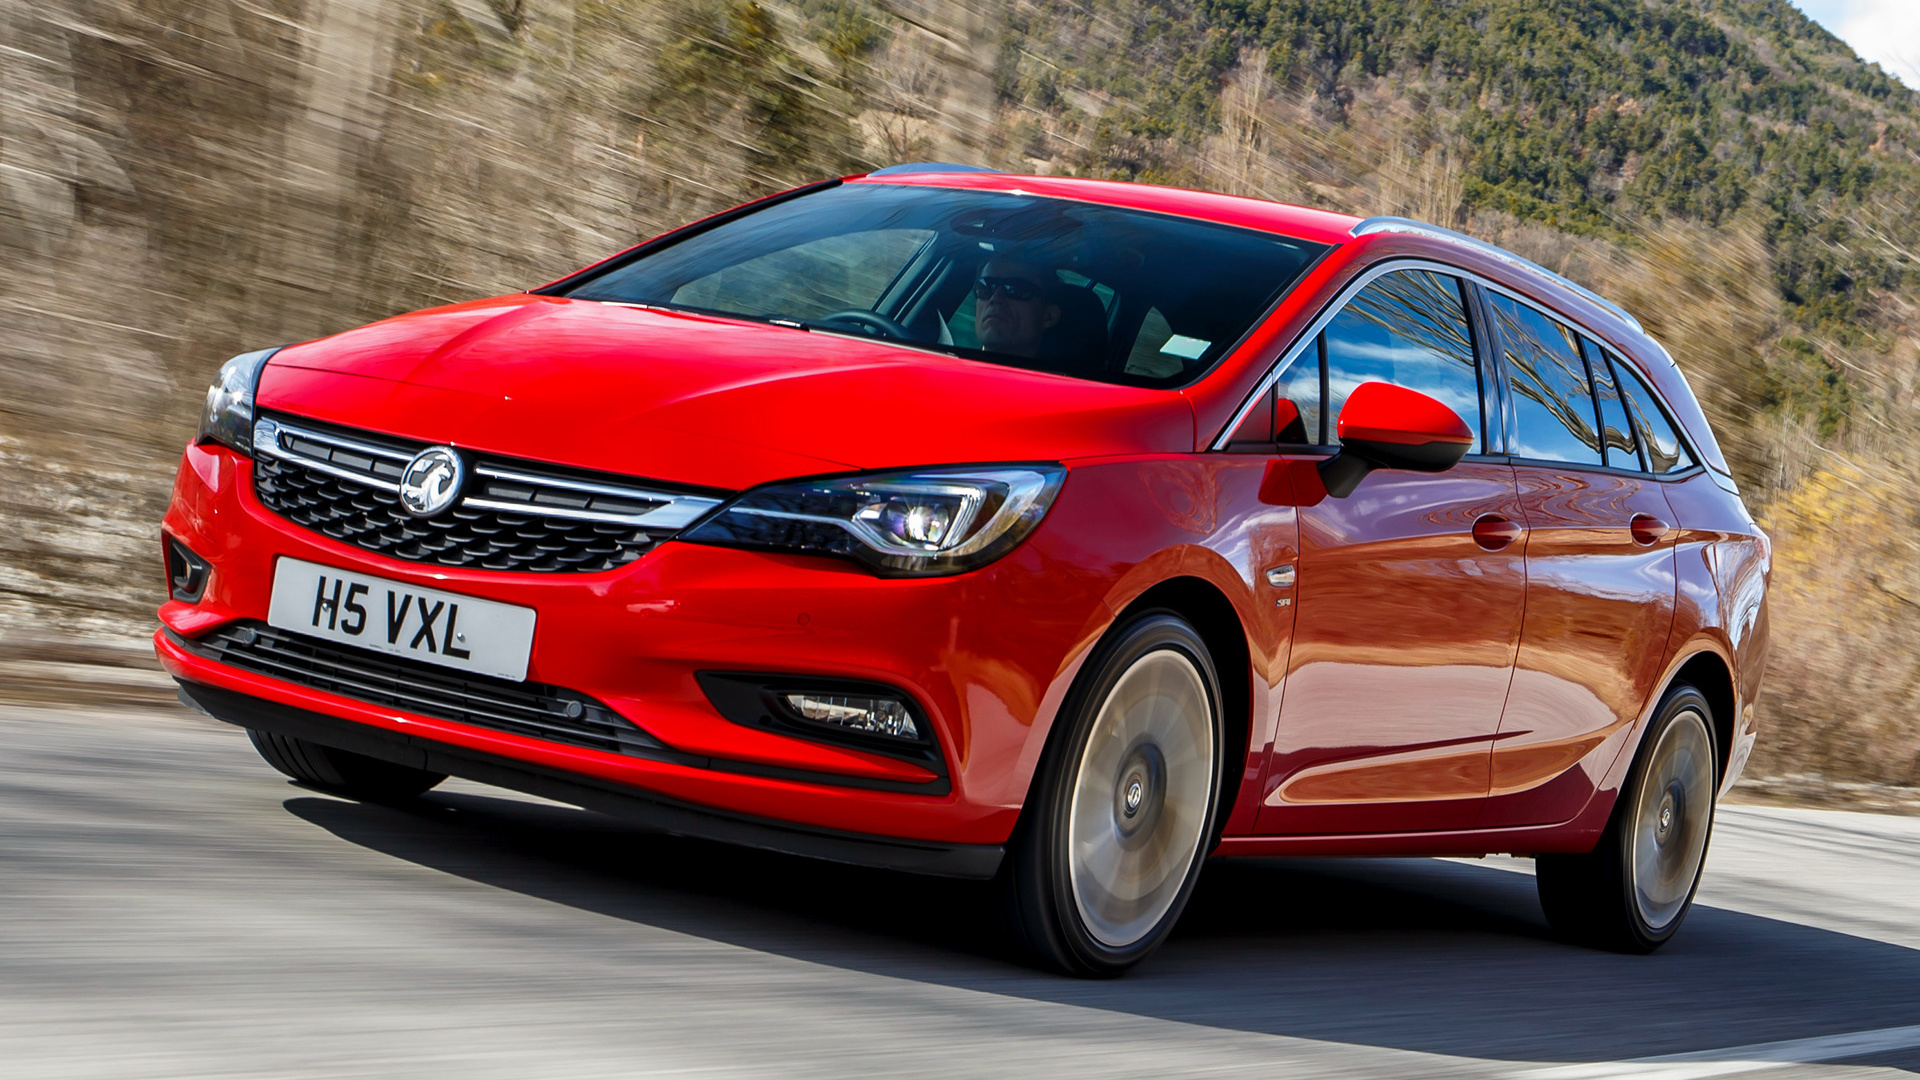 Vauxhall Astra Sports Tourer Wallpaper And HD Image Car